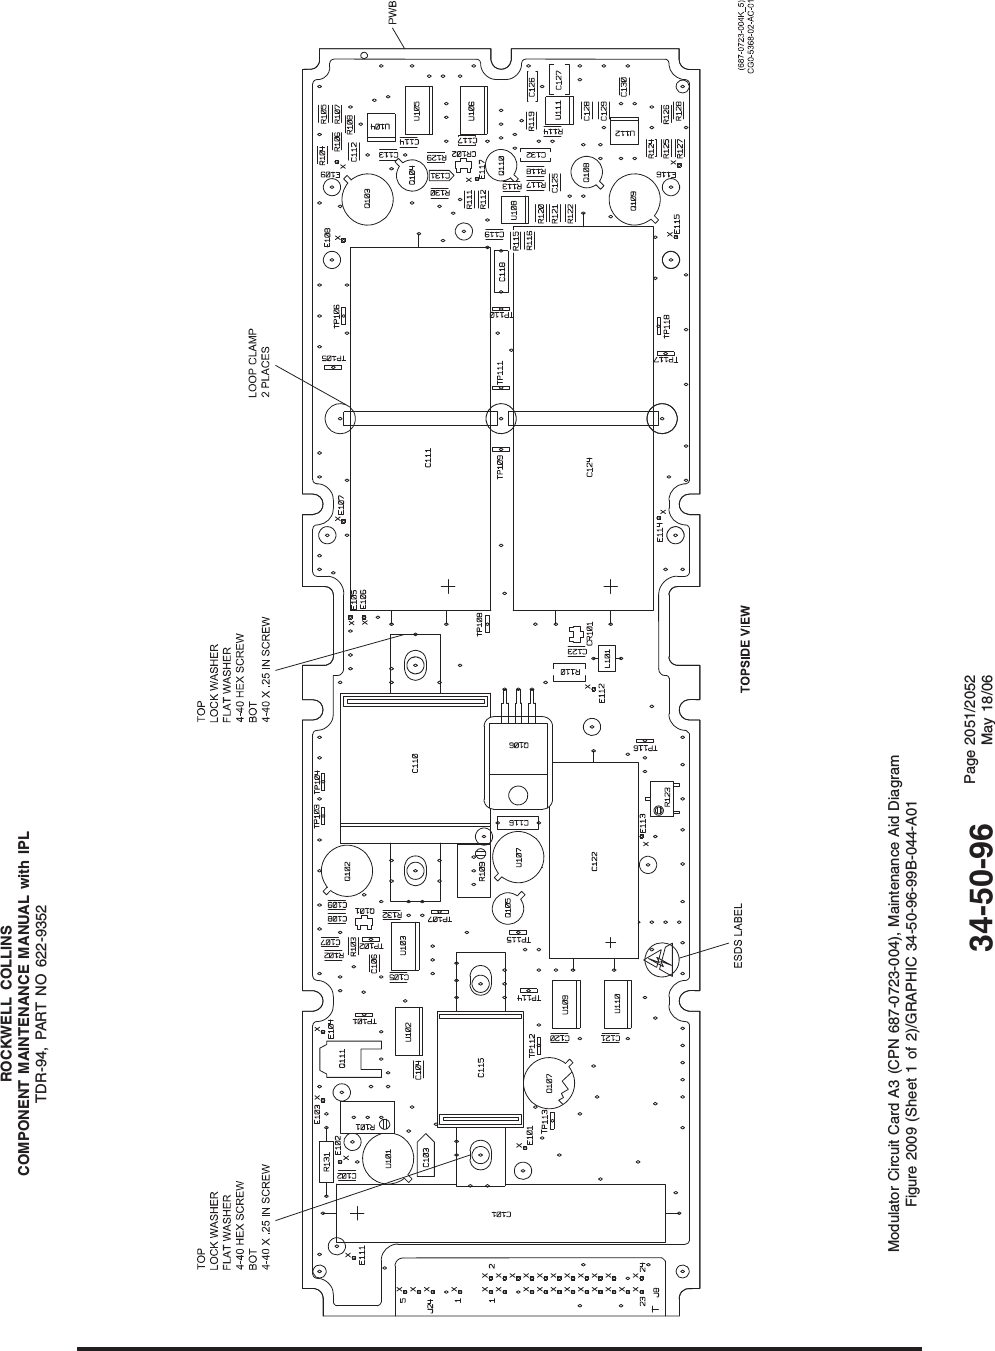 ROCKWELL COLLINSCOMPONENT MAINTENANCE MANUAL with IPLTDR-94, PART NO 622-9352Modulator Circuit Card A3 (CPN 687-0723-004), Maintenance Aid DiagramFigure 2009 (Sheet 1 of 2)/GRAPHIC 34-50-96-99B-044-A0134-50-96 Page 2051/2052May 18/06